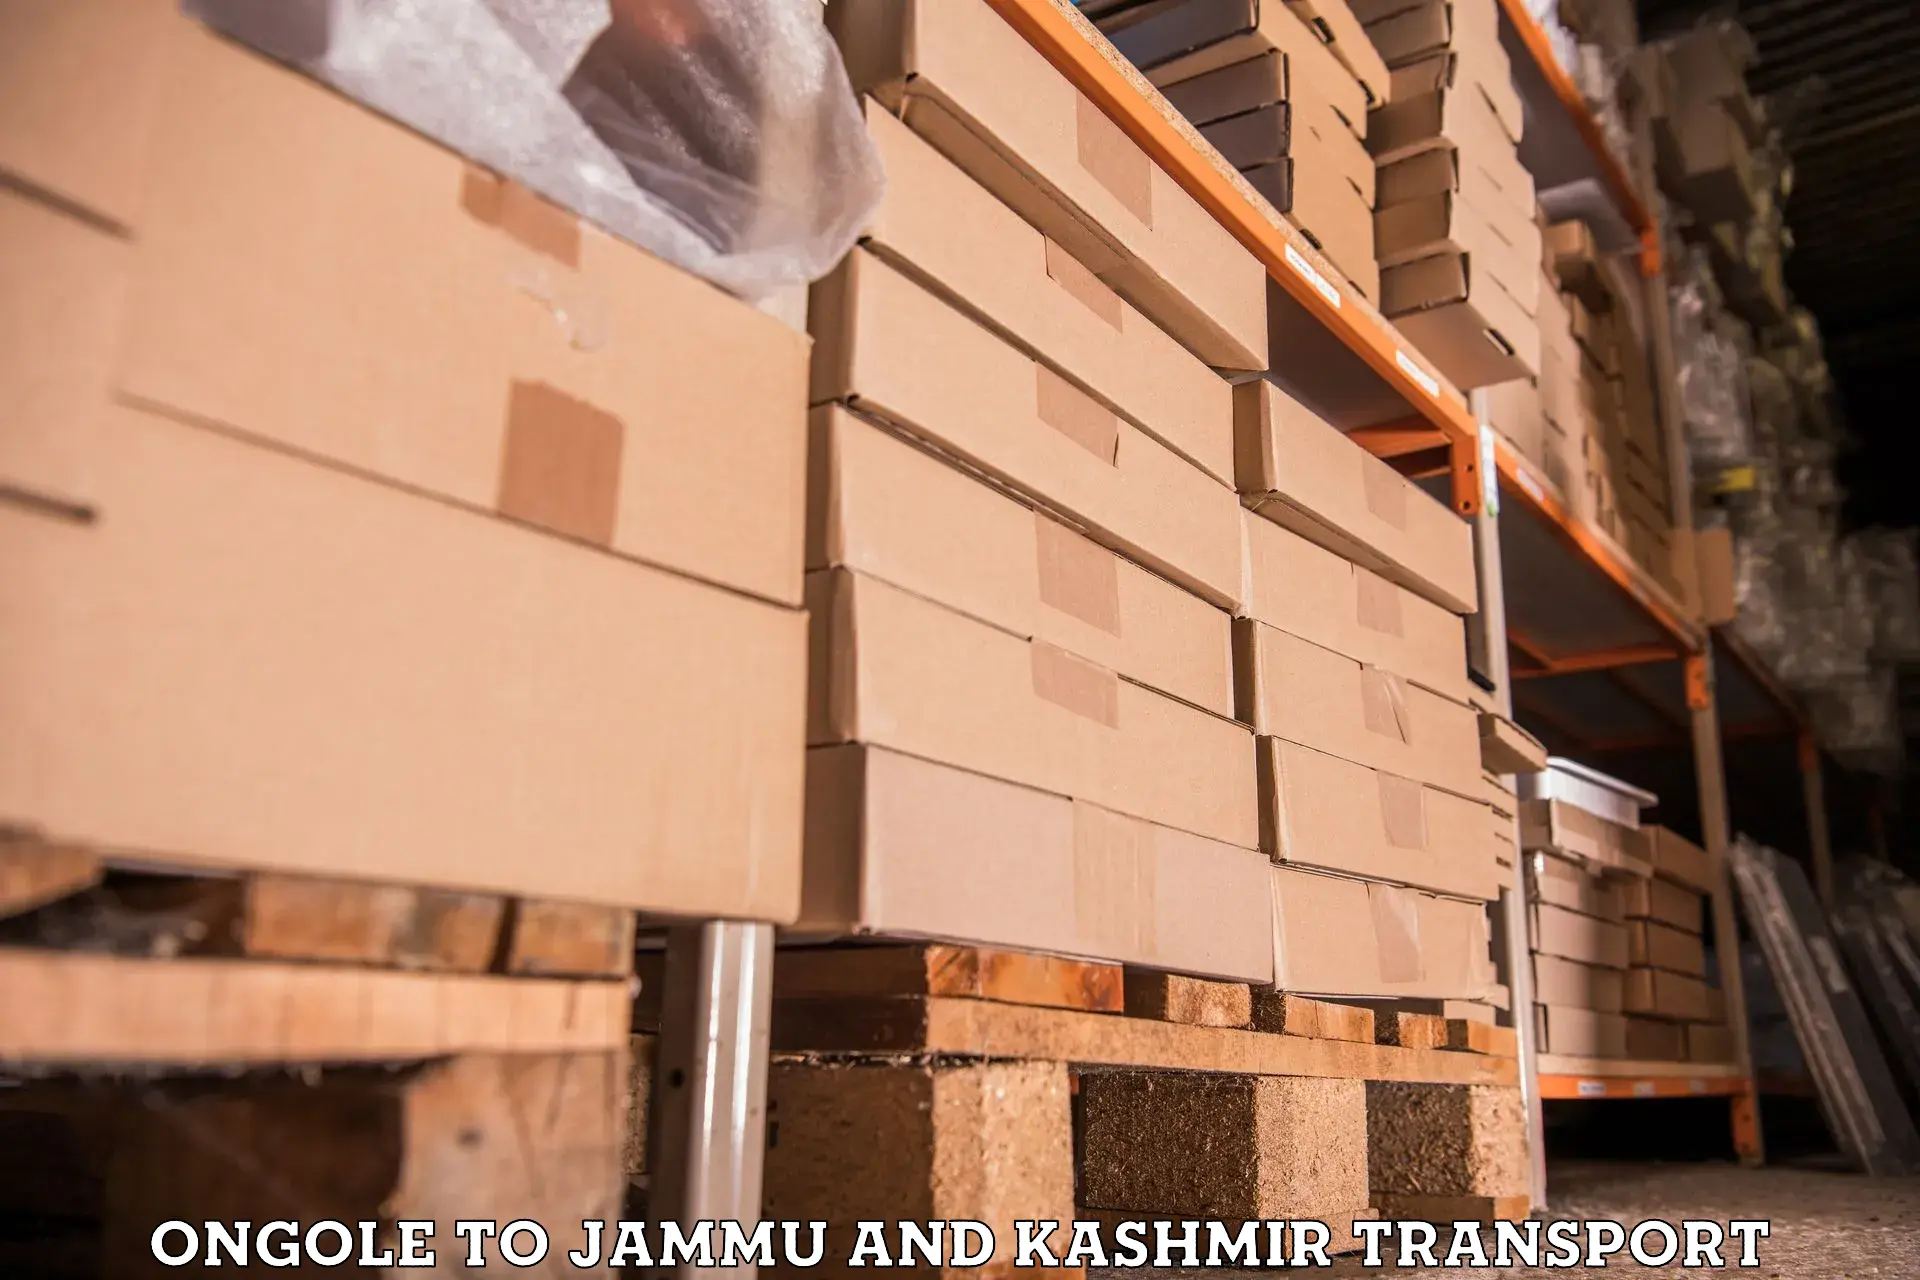 Daily parcel service transport Ongole to Baramulla